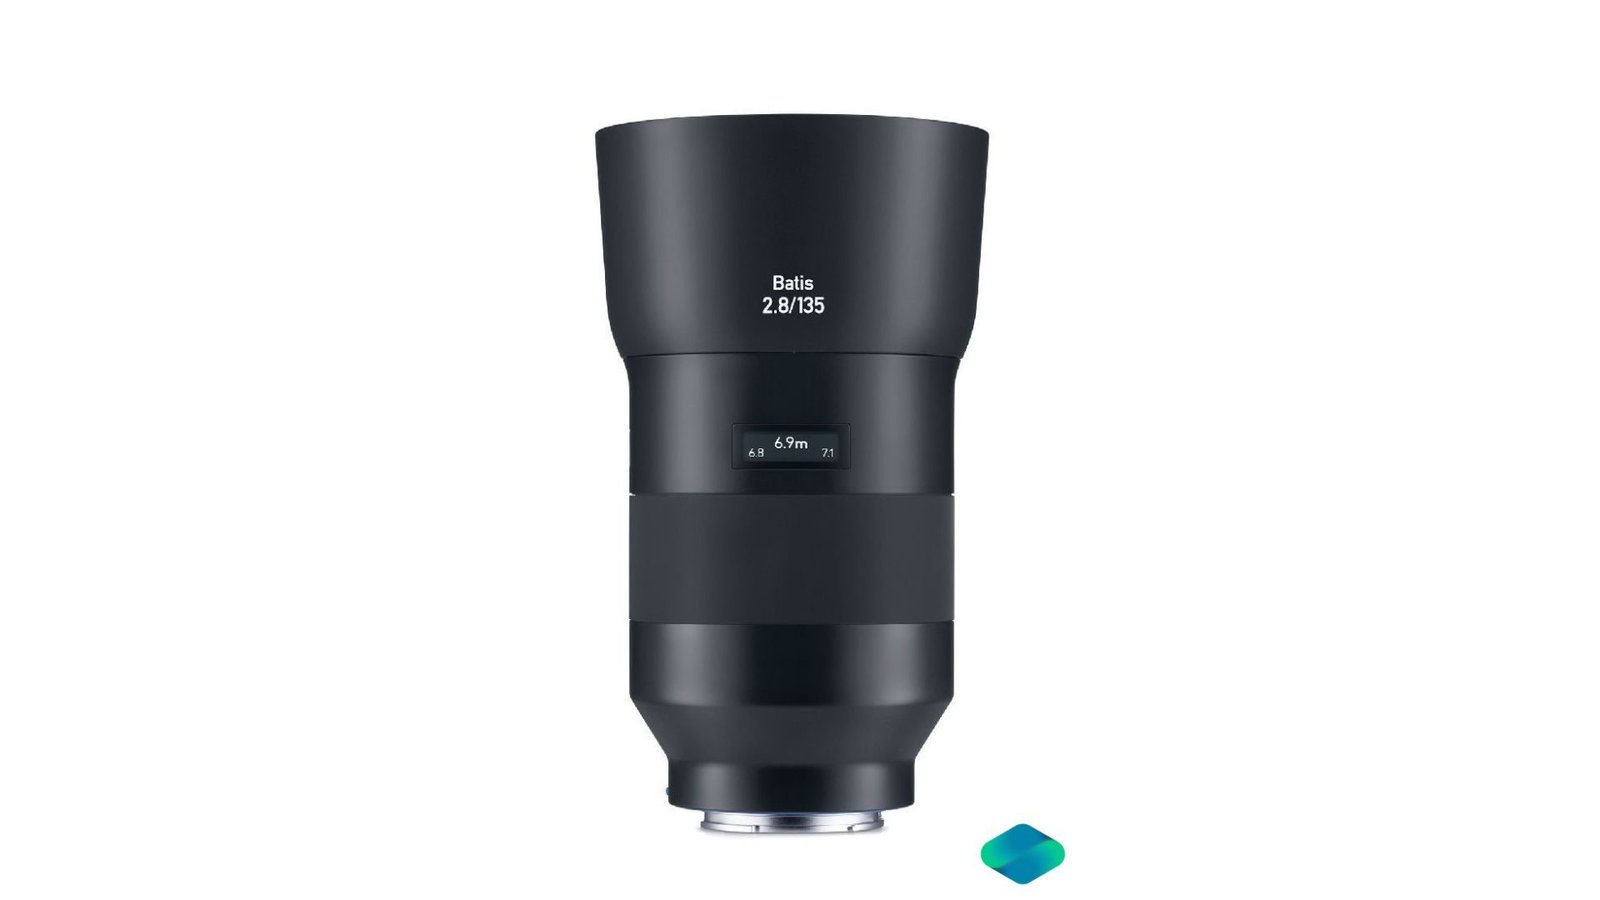 Rent ZEISS Batis Lens for Sony E Mount 2.8135 in Delhi NCR, Camera, Camera lenses for rent, Camera accessories, in Delhi Gurgaon Noida, hire Shooting equipment, Lighting equipment rental, Film gear rental for Video production, camera rental company in Delhi, film equipment rental company